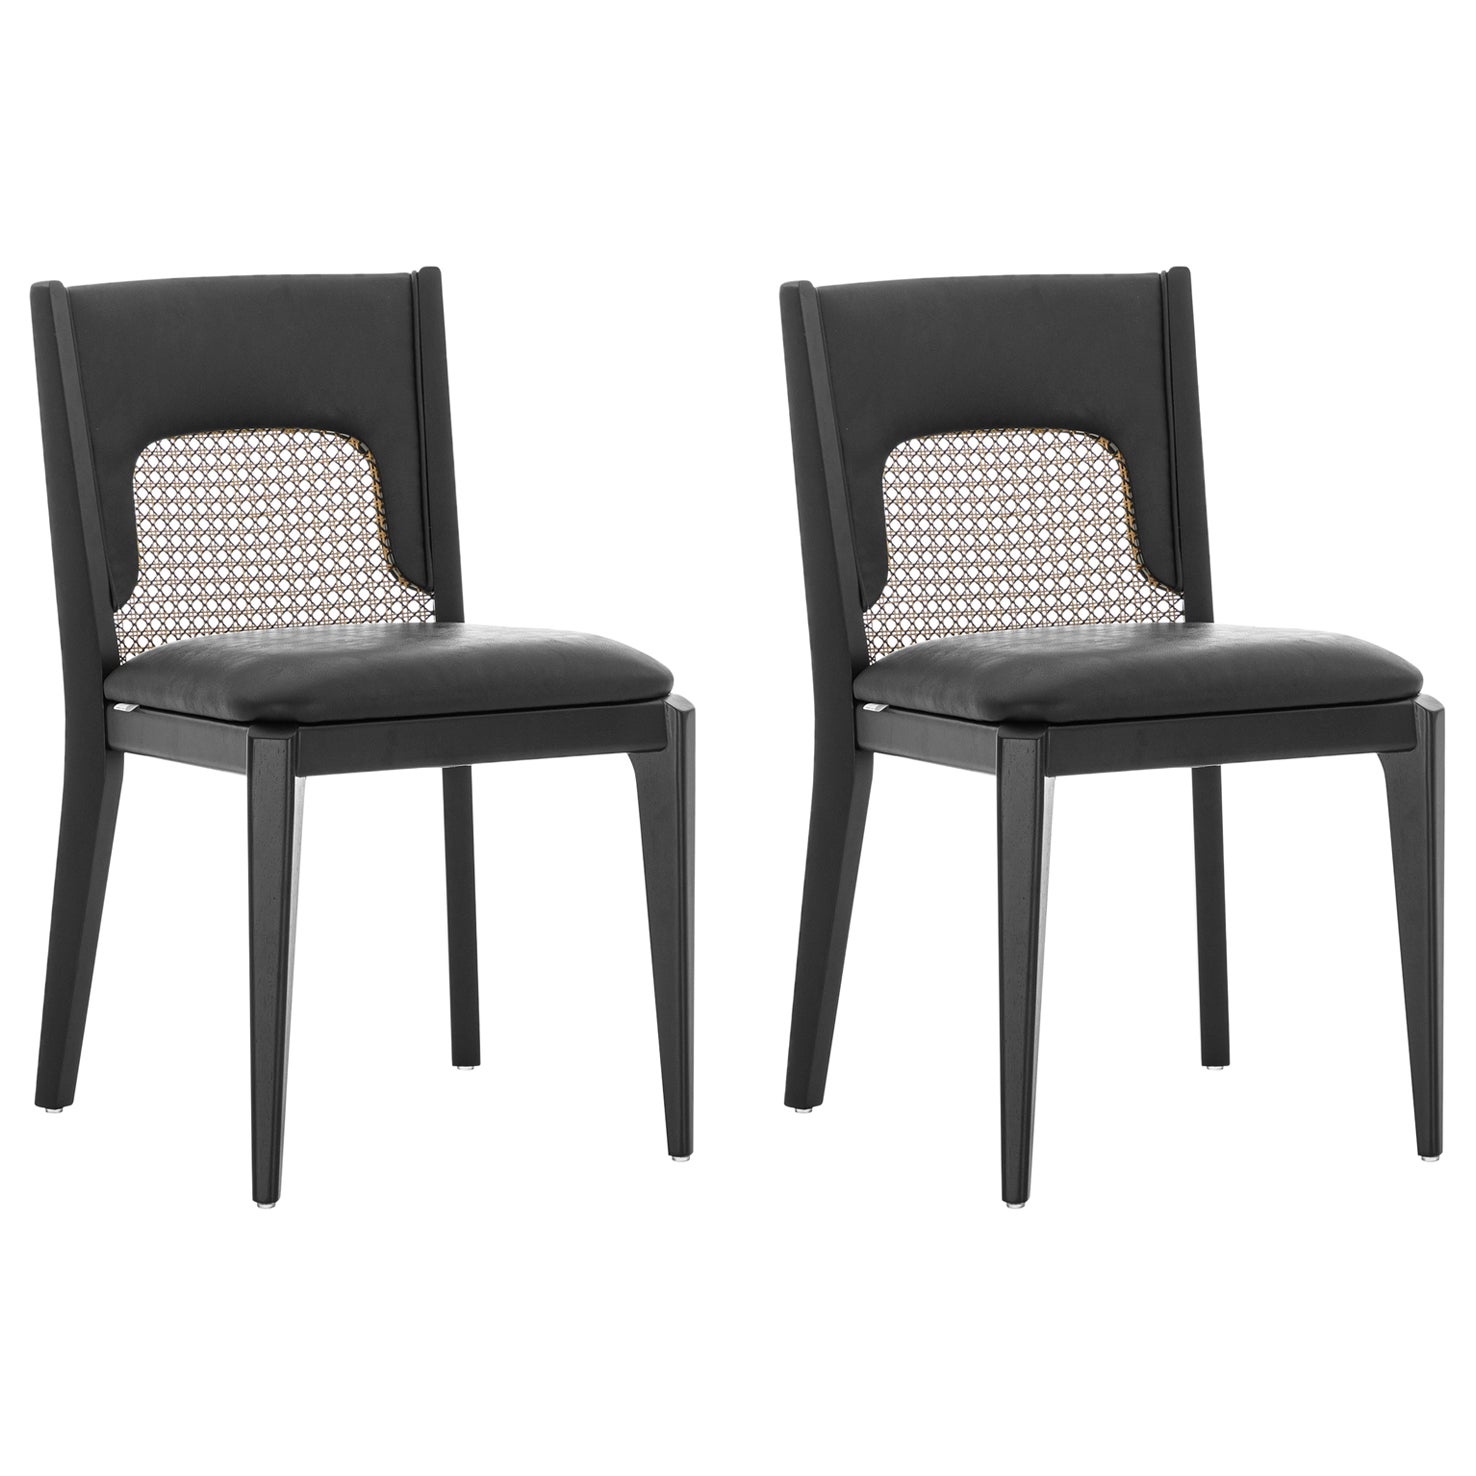 Zani Dining Chair in Black Upholstery Back and Black Wood Finish, Set of 2